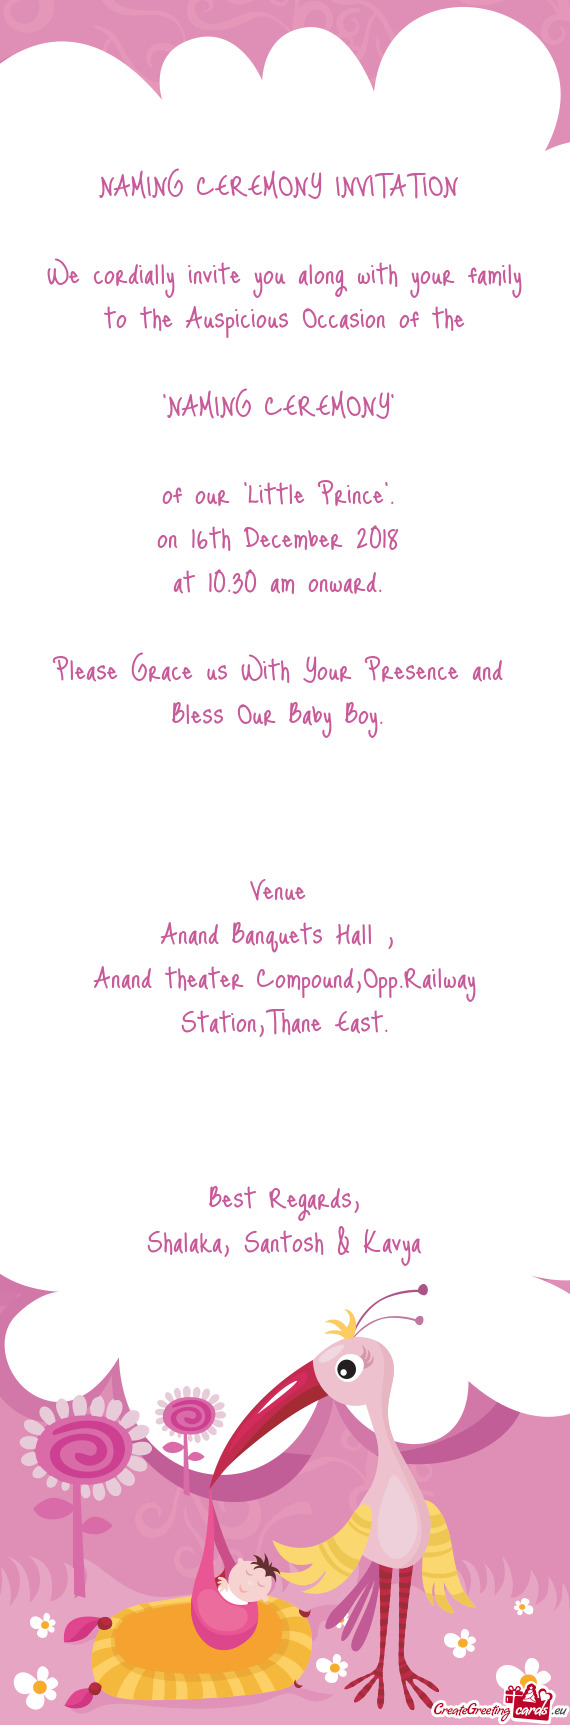 NAMING CEREMONY INVITATION 
 
 We cordially invite you along with your family to the Auspicious Occa